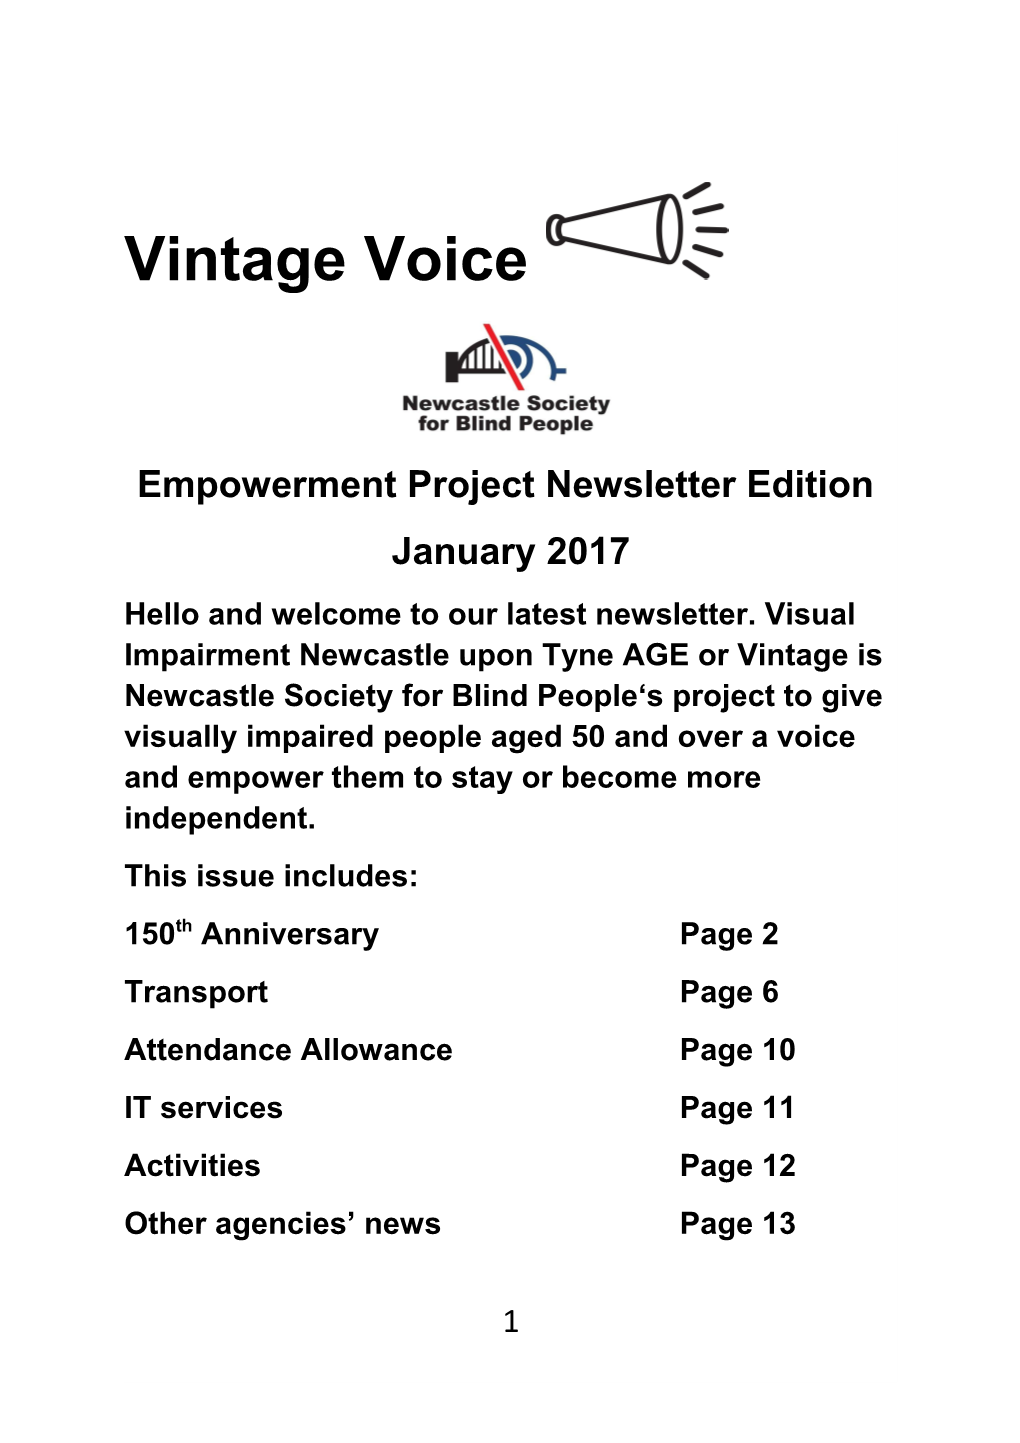 Empowerment Project Newsletter Edition